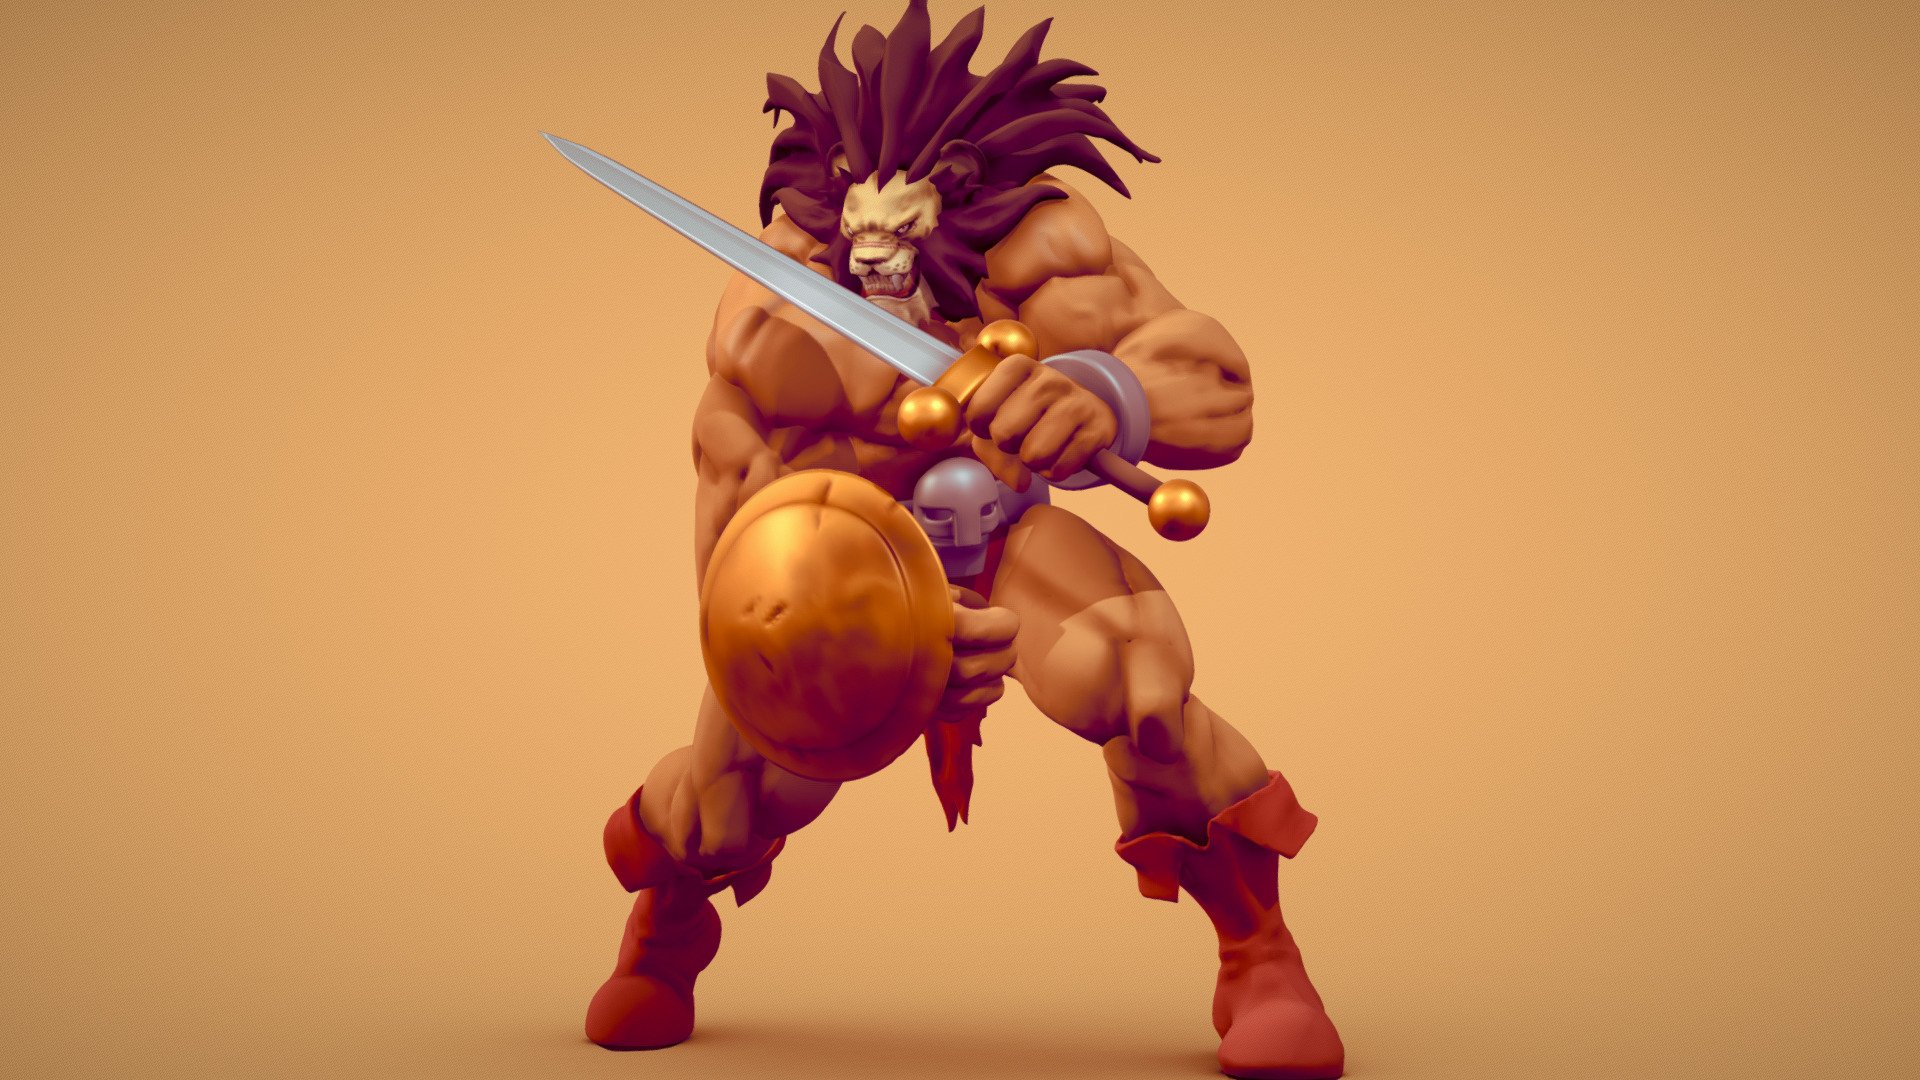 Fanart of one of the playable characters in Capcom's old arcade game Red Earth. Made in Blender. He's actually a human who's cursed by being given the head of a lion - Leo the Lion Barbarian - 3D model by C-List (@Mulberry_Bill) 3d model